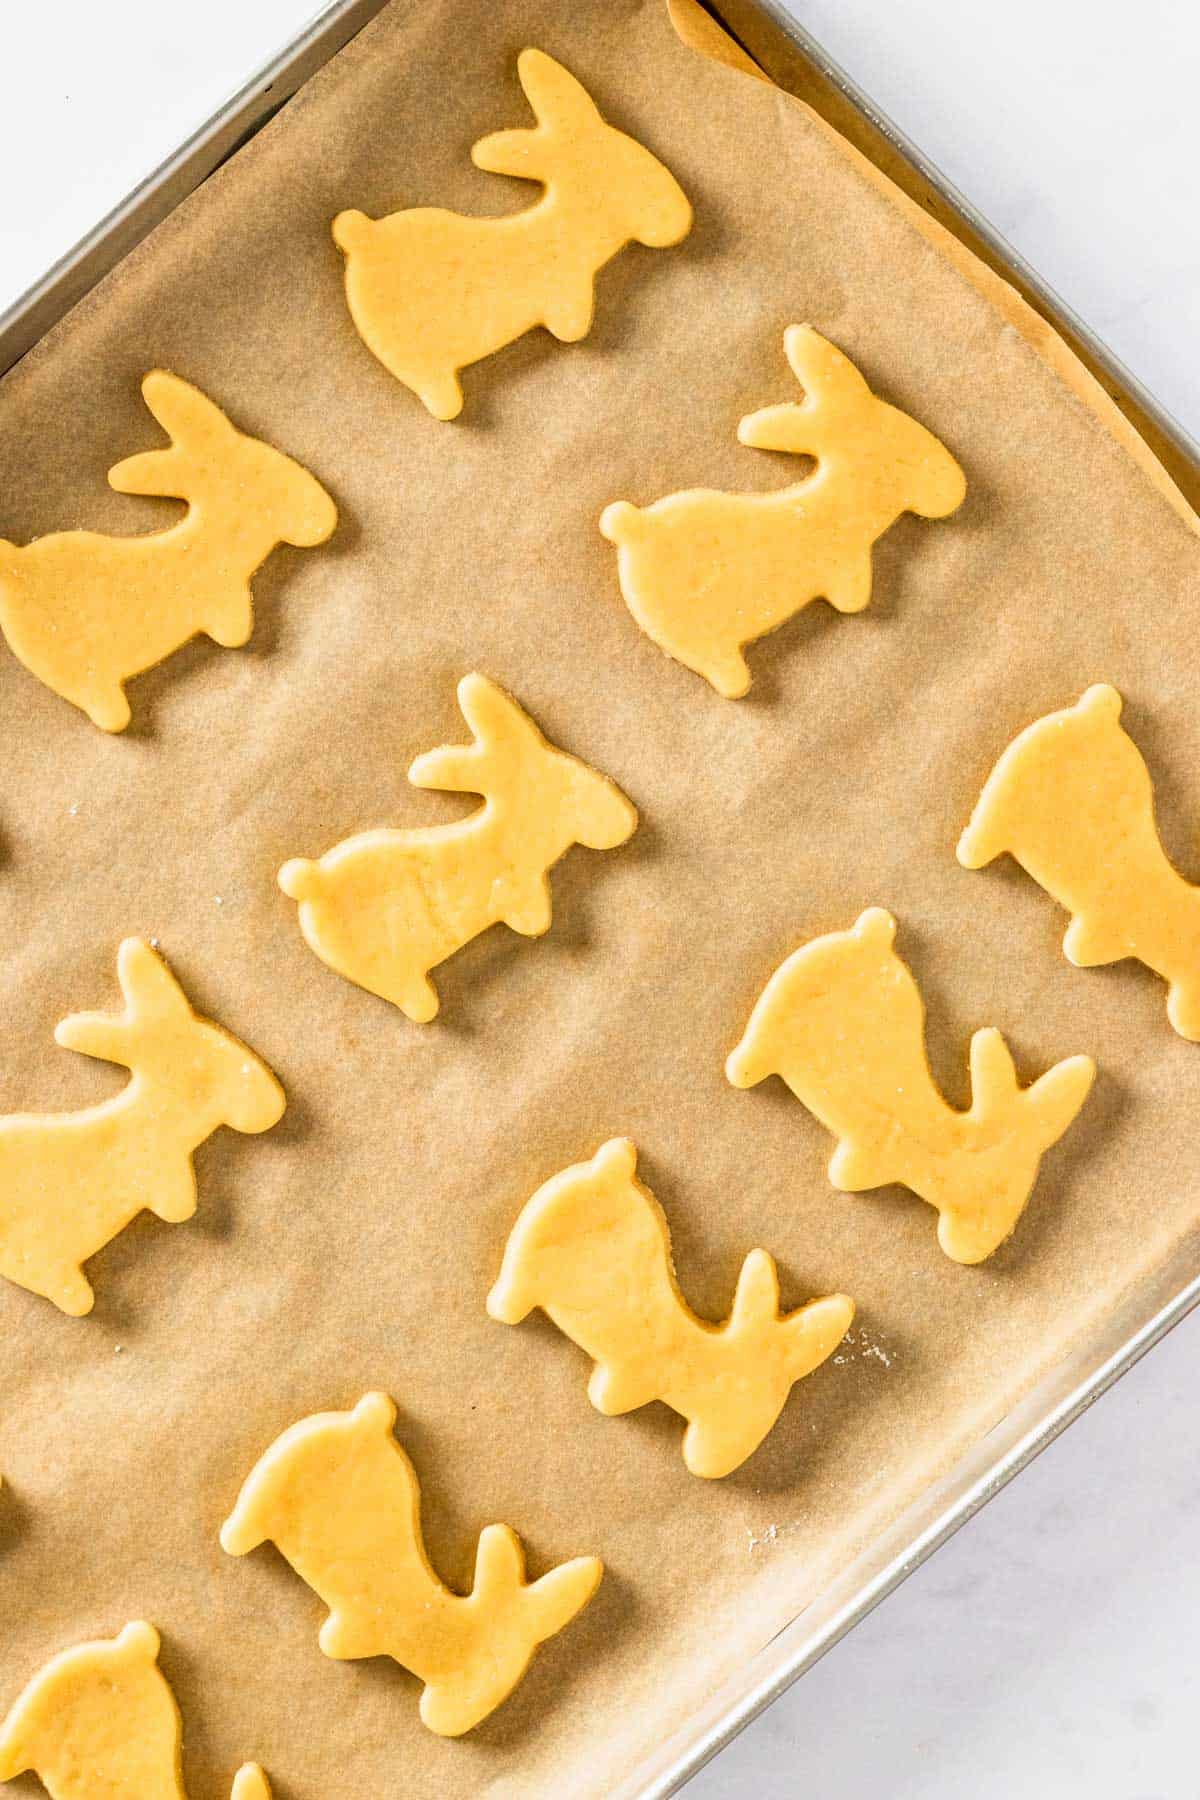 place bunny shaped cookies onto baking sheet